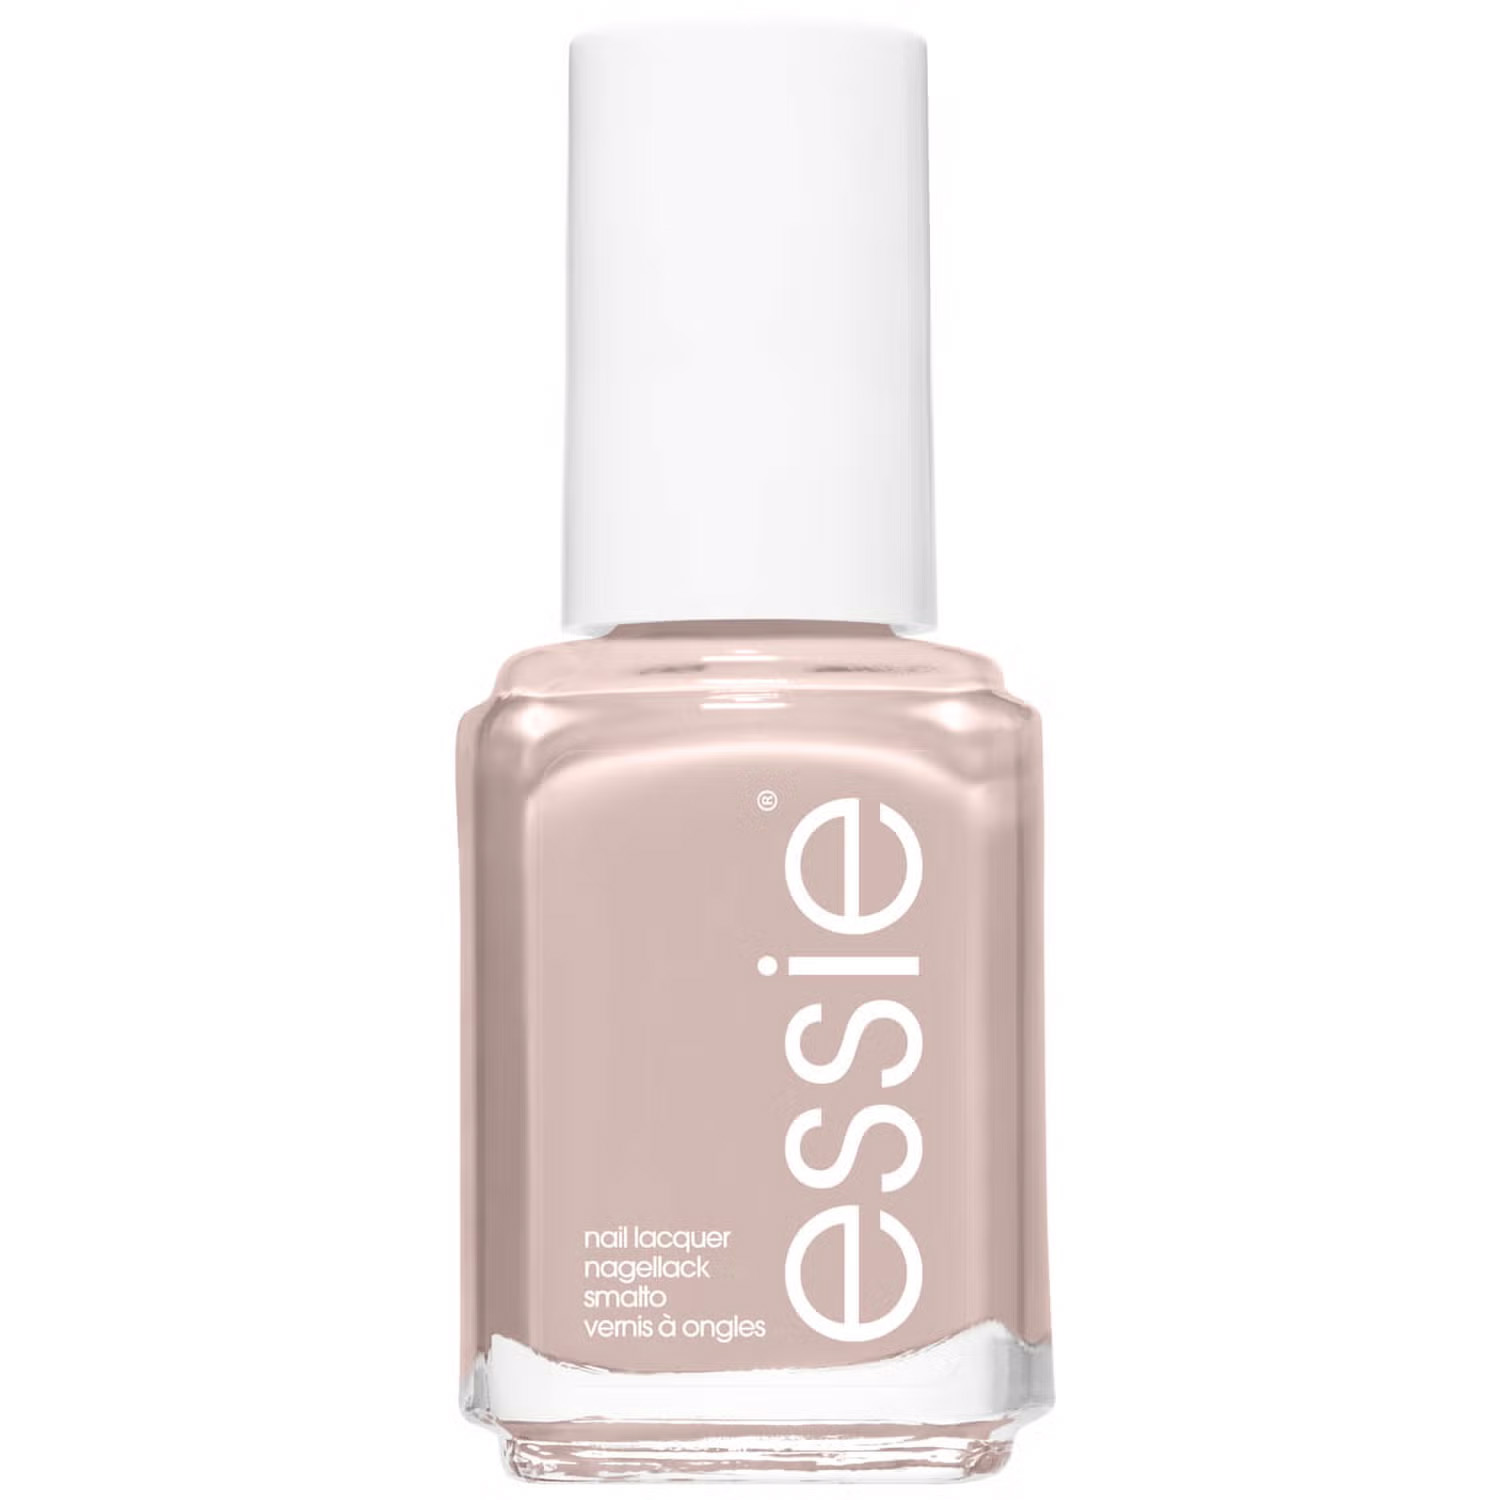 List of 5-Free Vegan and Cruelty-Free Nail Polish Brands | Cruelty free nail  polish, Vegan nail polish, Nail polish brands